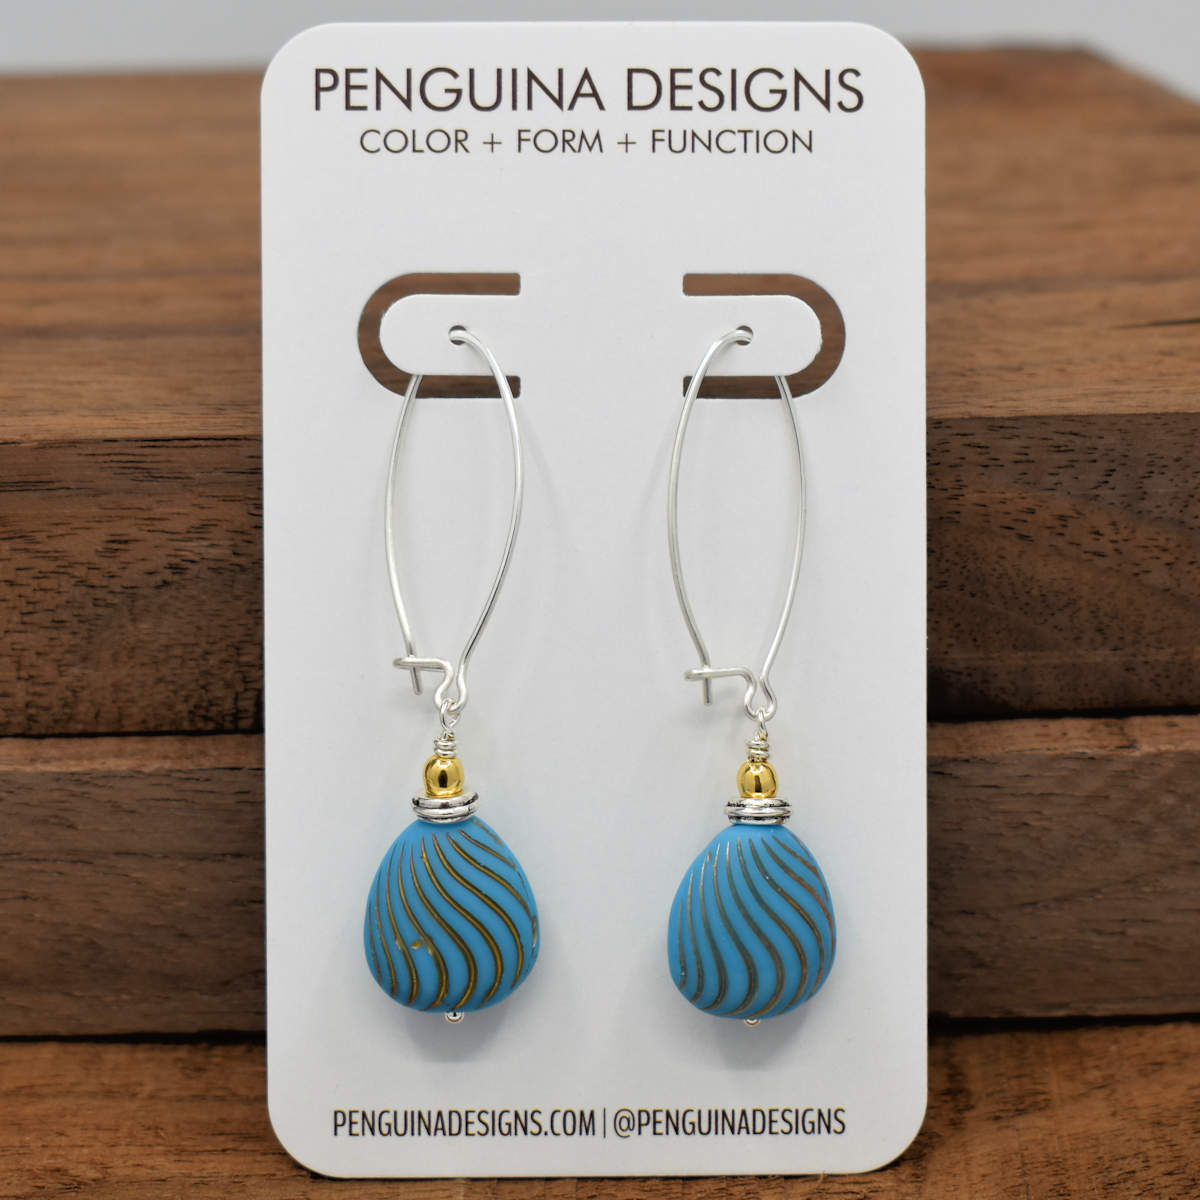 A pair of earrings on a white card rest against a wood background. The earrings have long silver oval wires that latch and a drop at the bottom that is formed from medium blue flat drop beads embossed with wavy gold stripes.